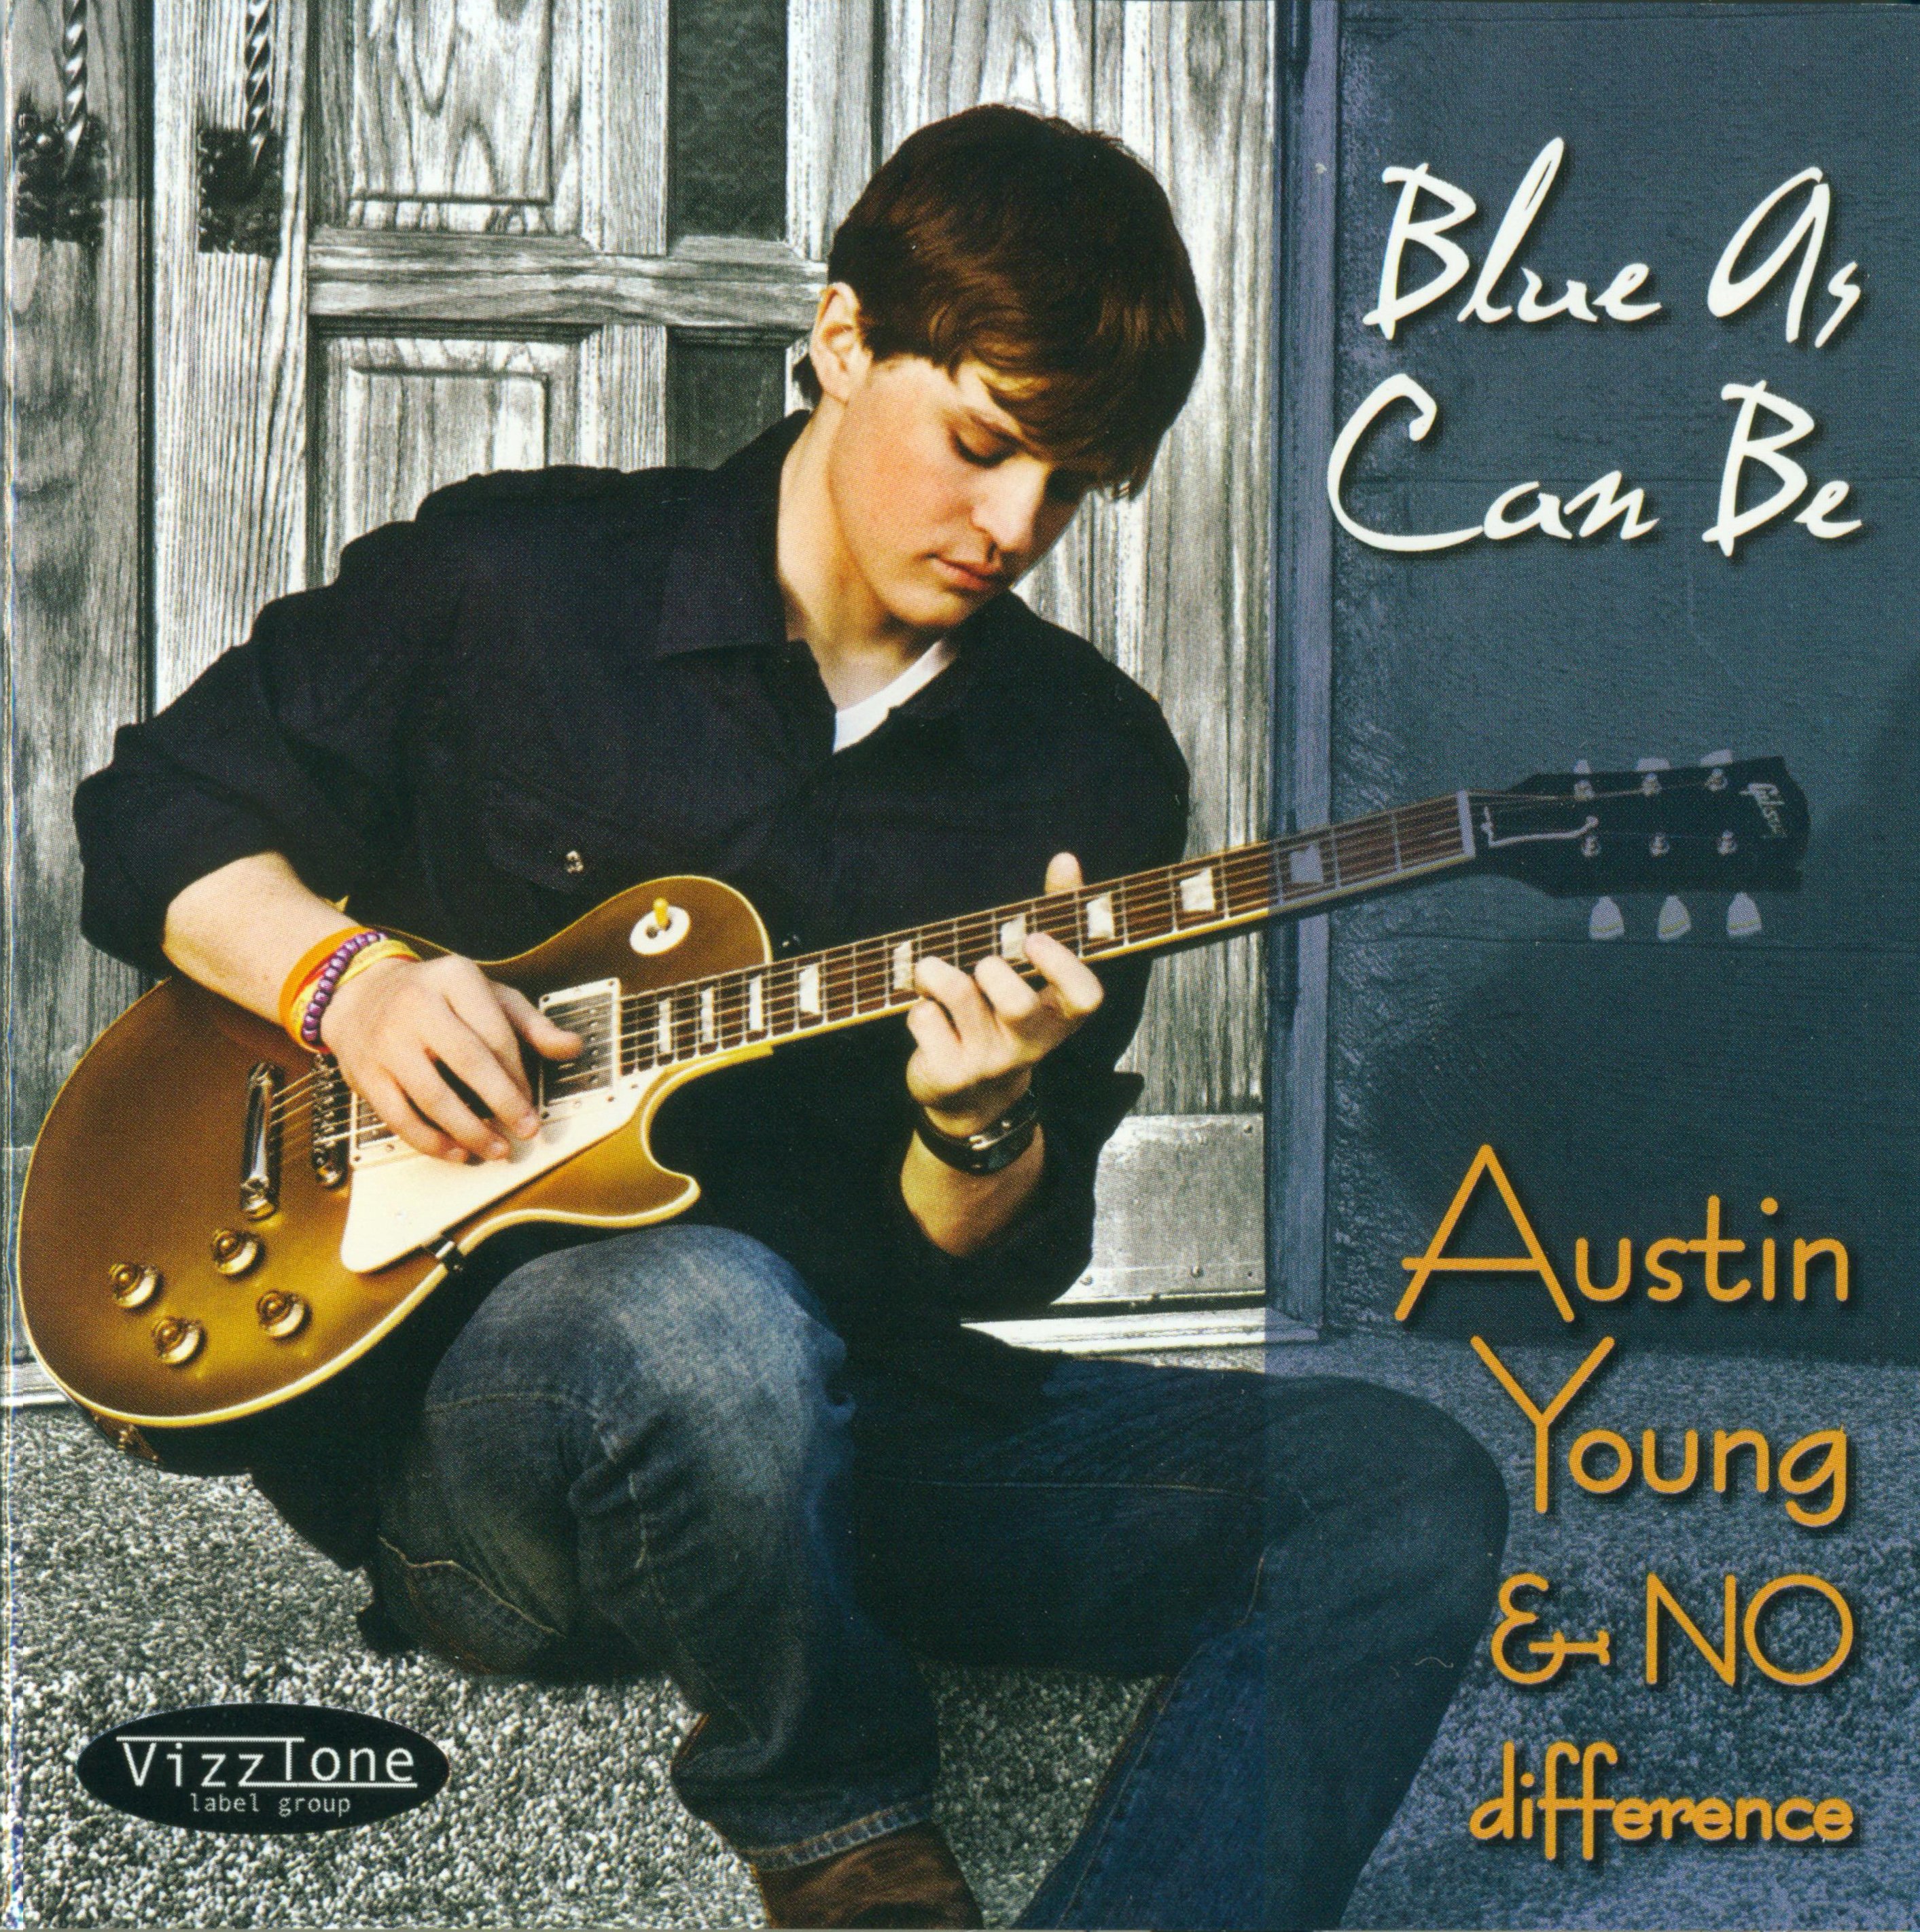 Austin Young & No Difference/Austin Young & No Difference (2013)